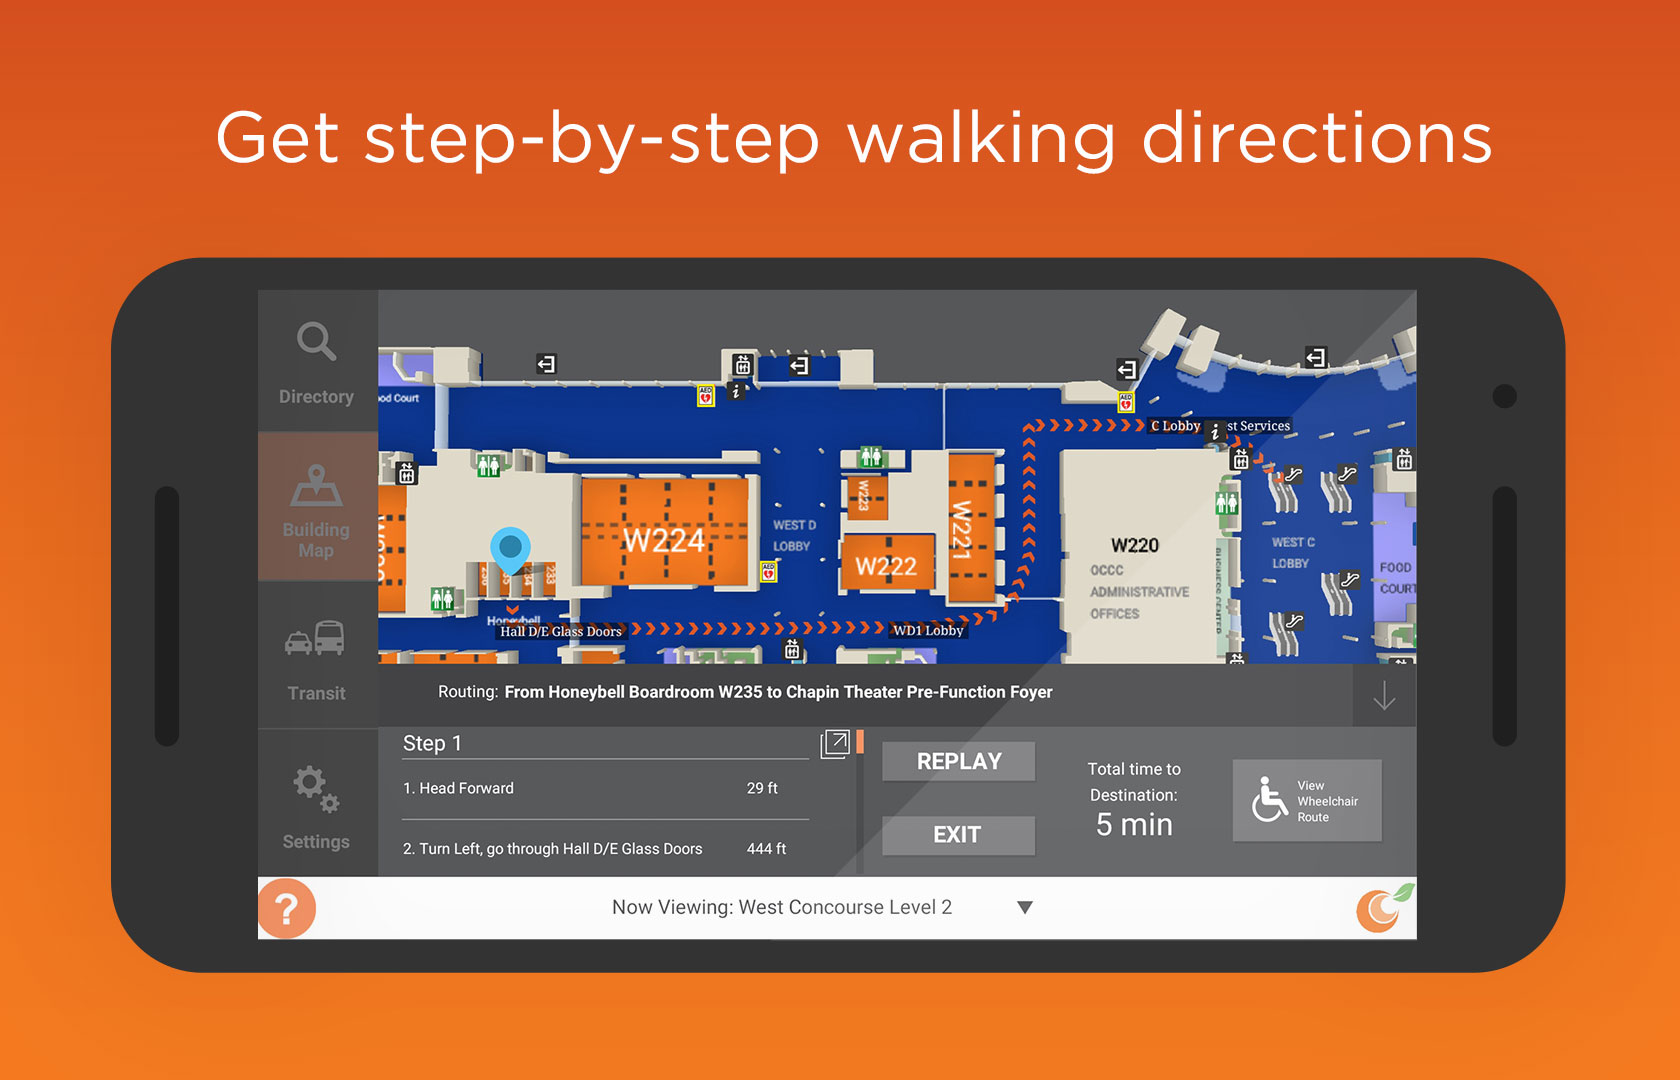 Get step-by-step walking directions